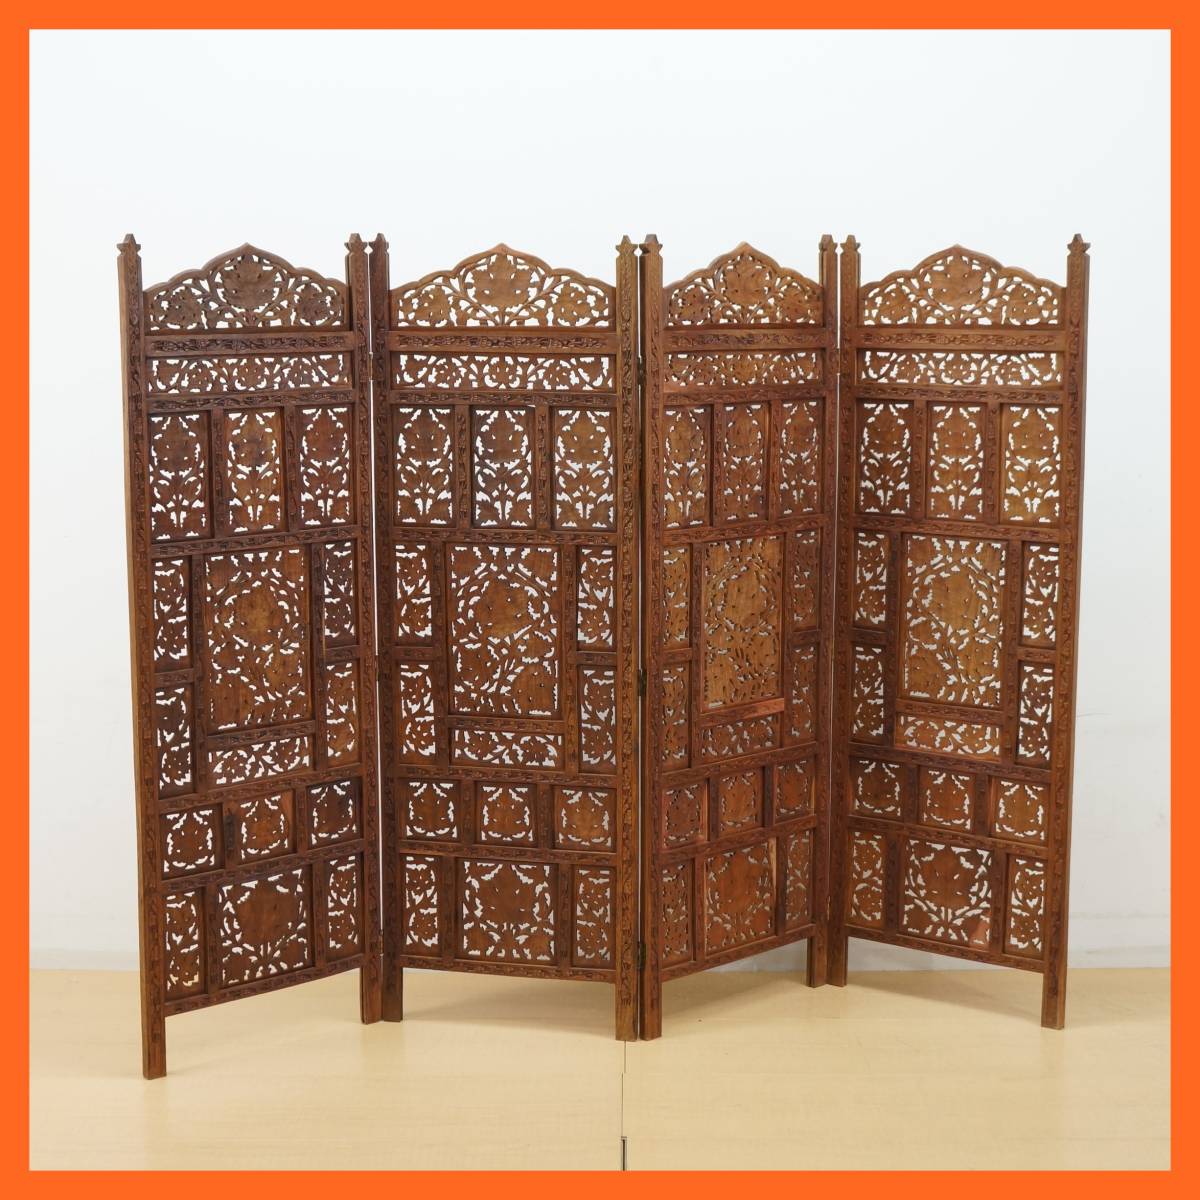  higashi is :[ Asian koroniaru] natural tree ... carving 4 ream partitioning screen width approximately 202. height approximately 151.5. partition folding divider * free shipping *